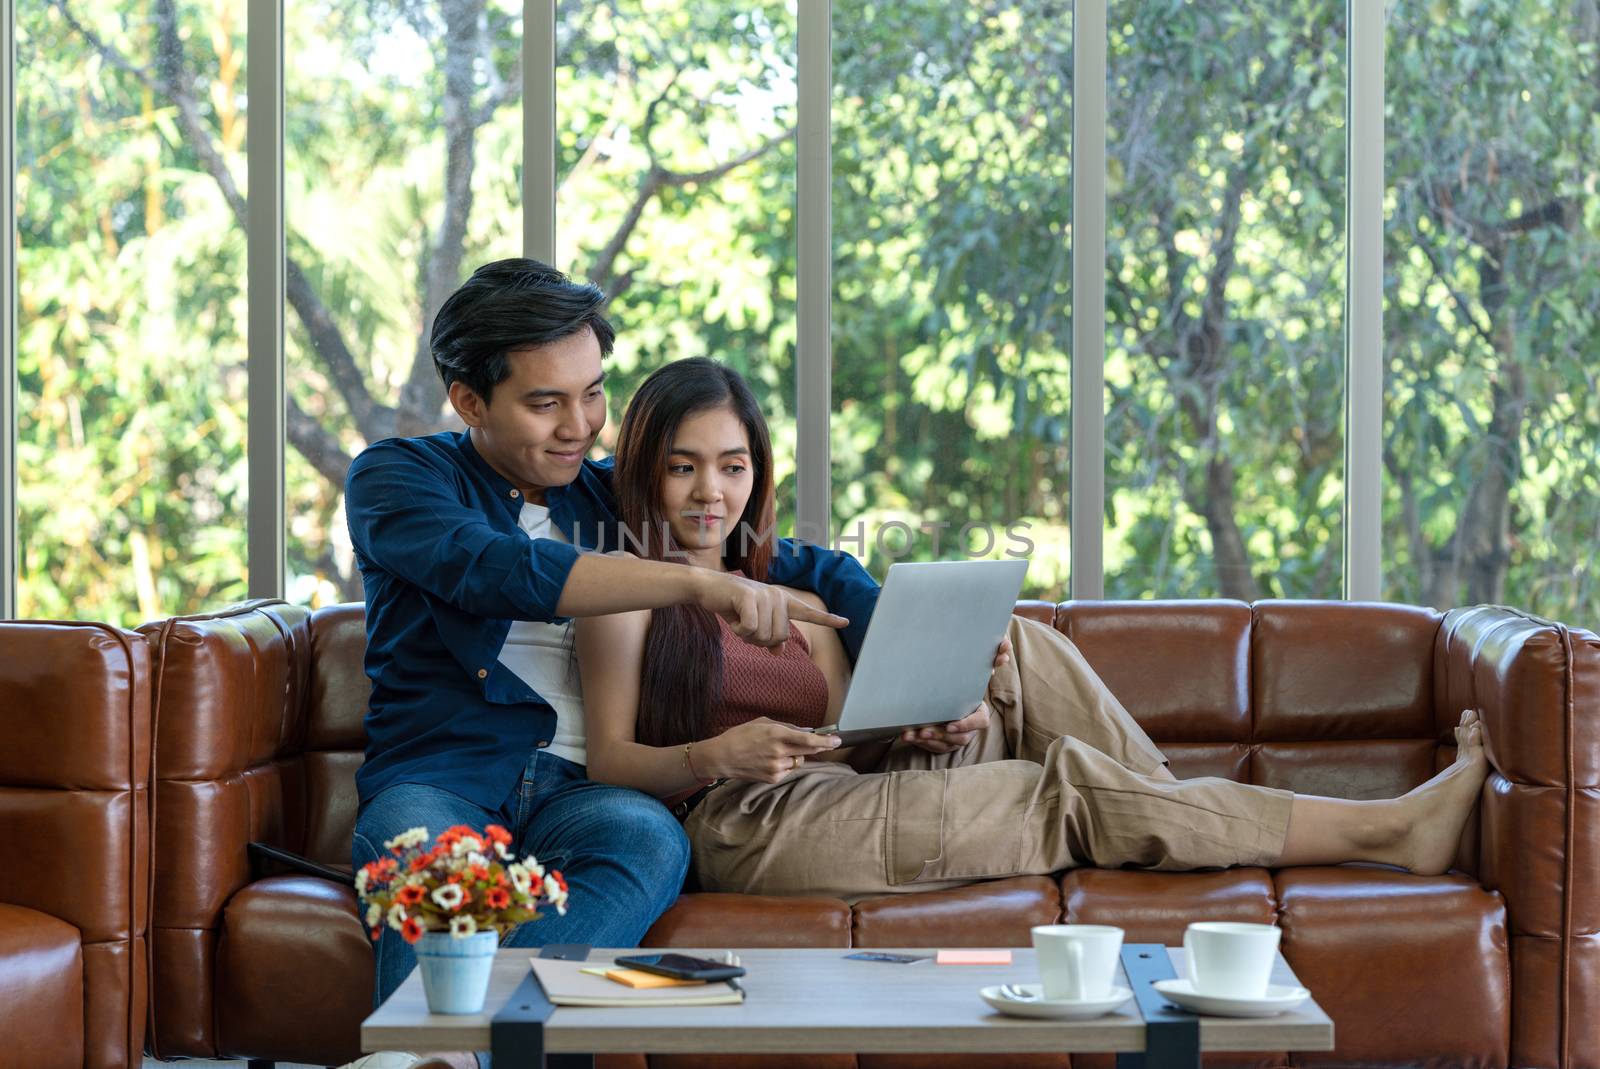 Young lovers spend time together on holidays in the living room. Both of them are interested in internet product information while the girl held laptop computer.